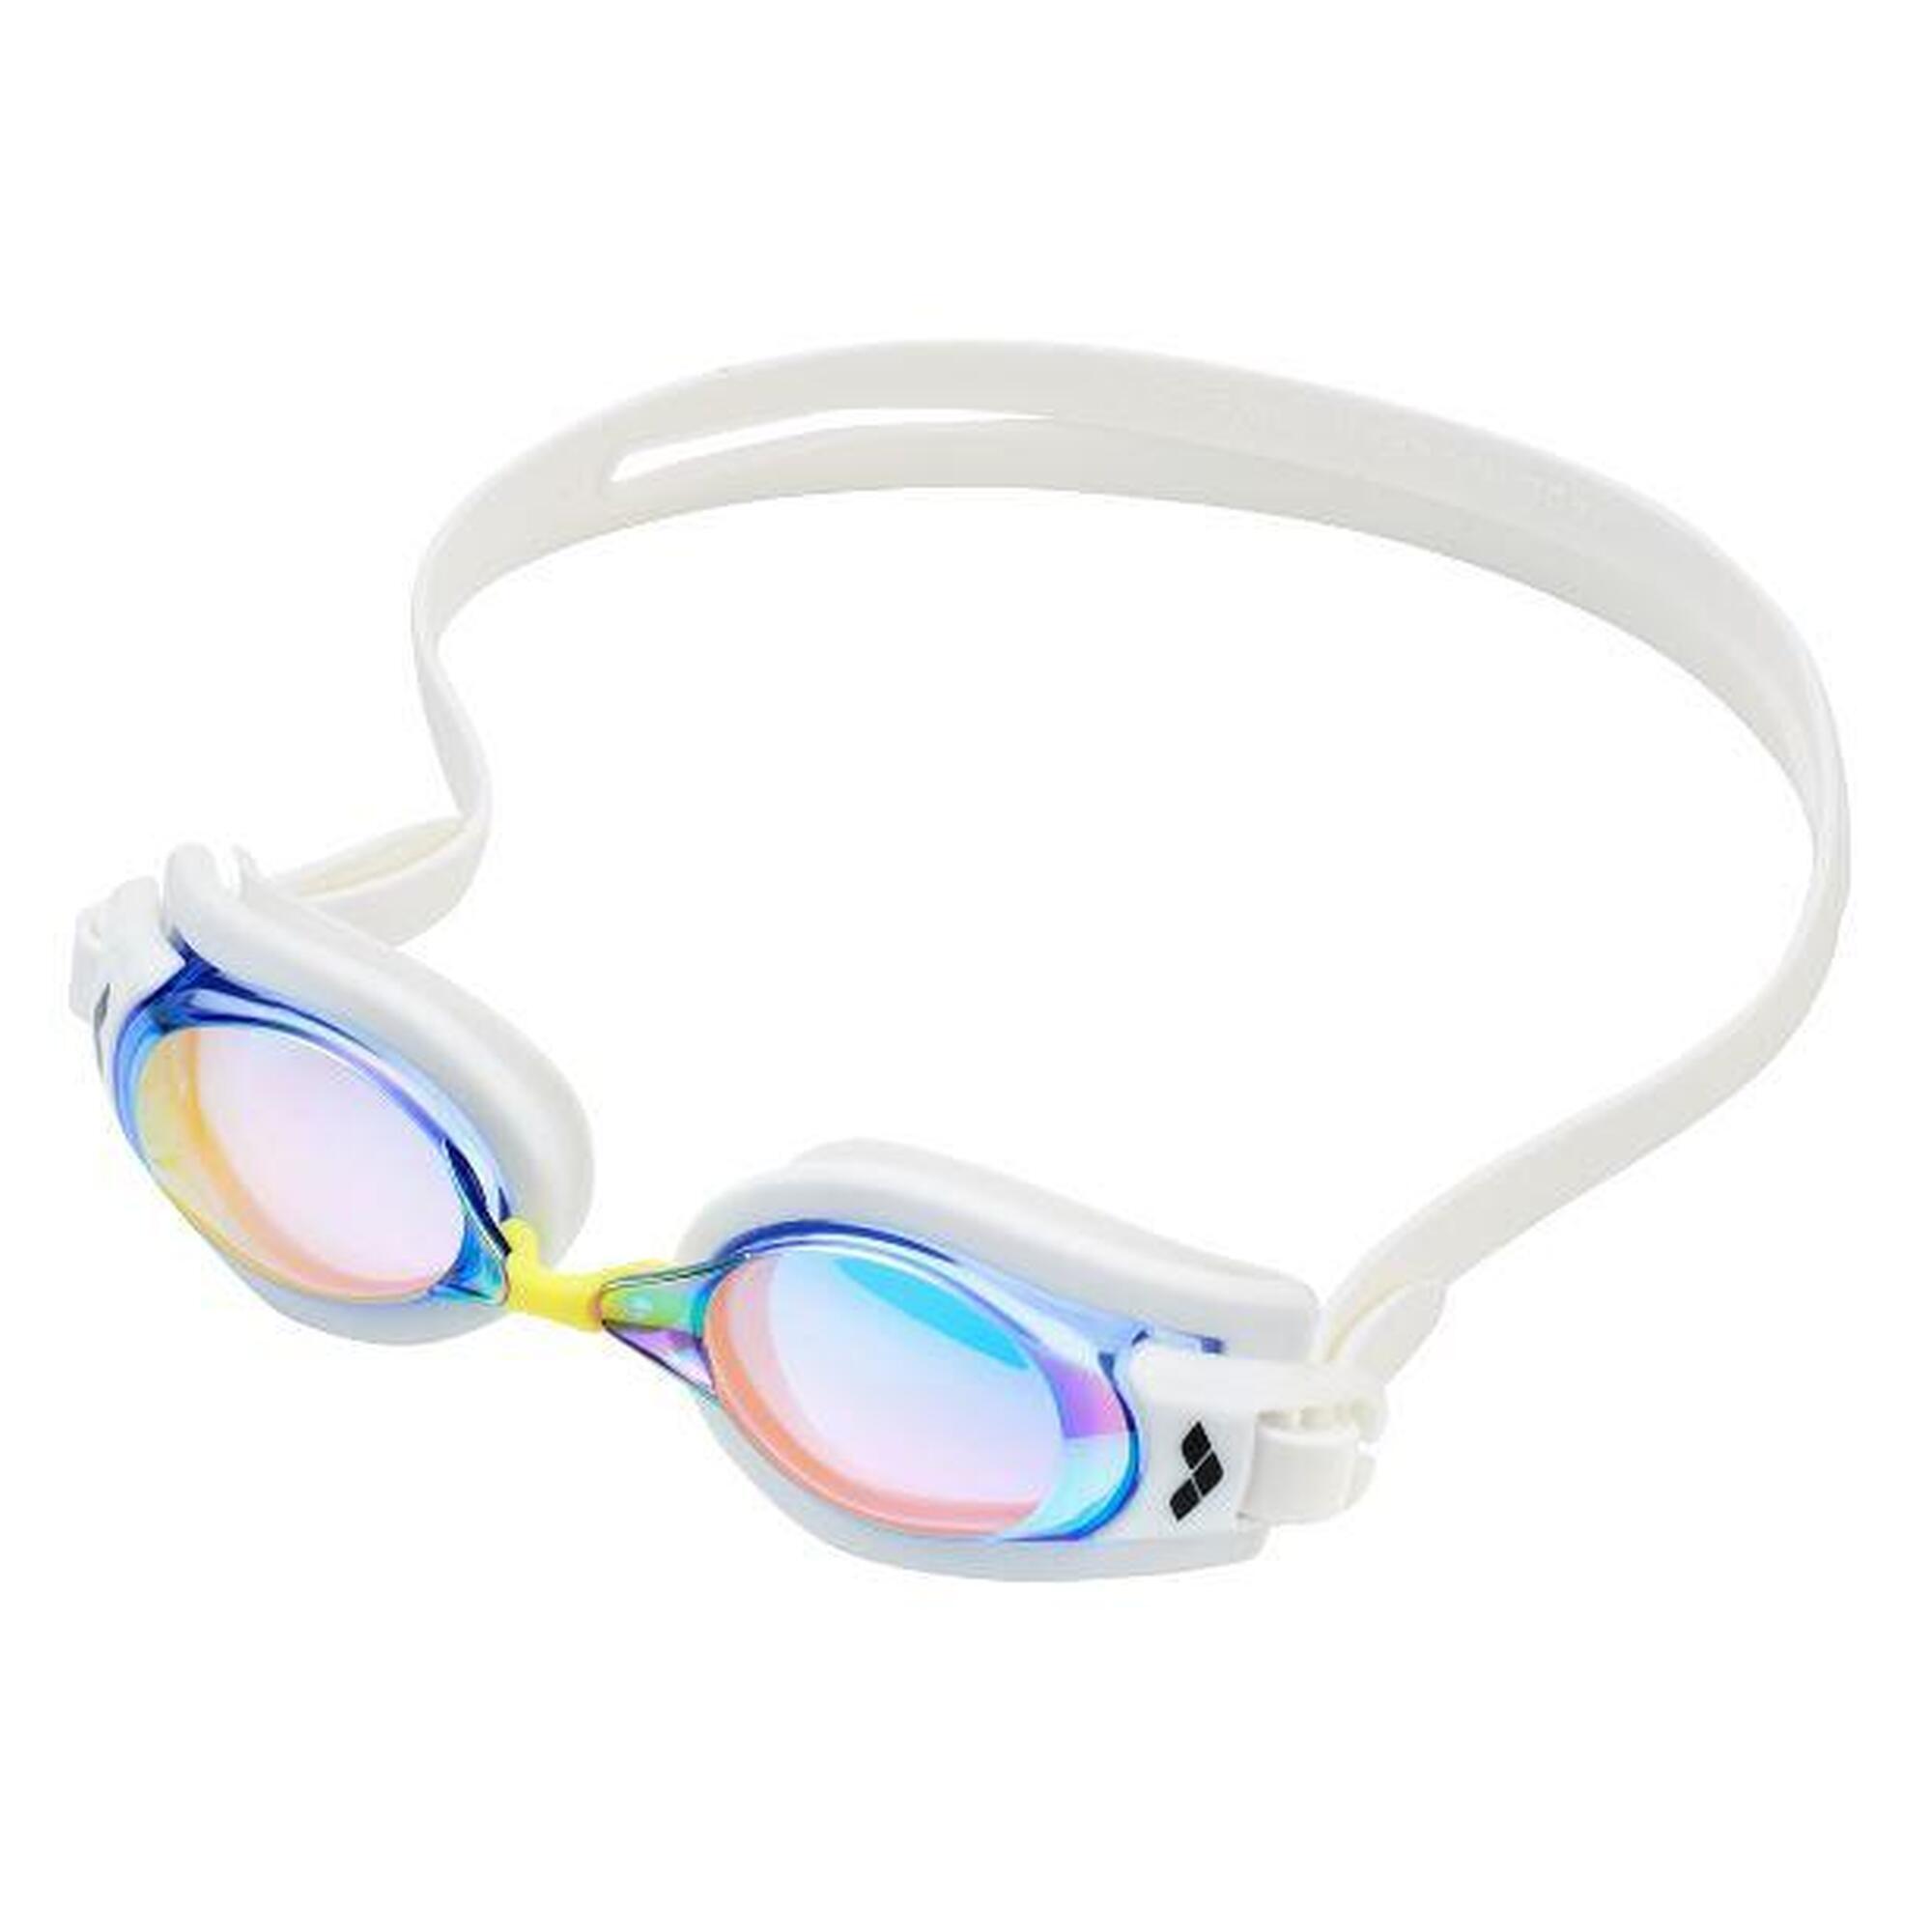 JAPAN MADE RE:NON 600 DIOPTERS OPTICAL MIRROR GOGGLE - WHITE